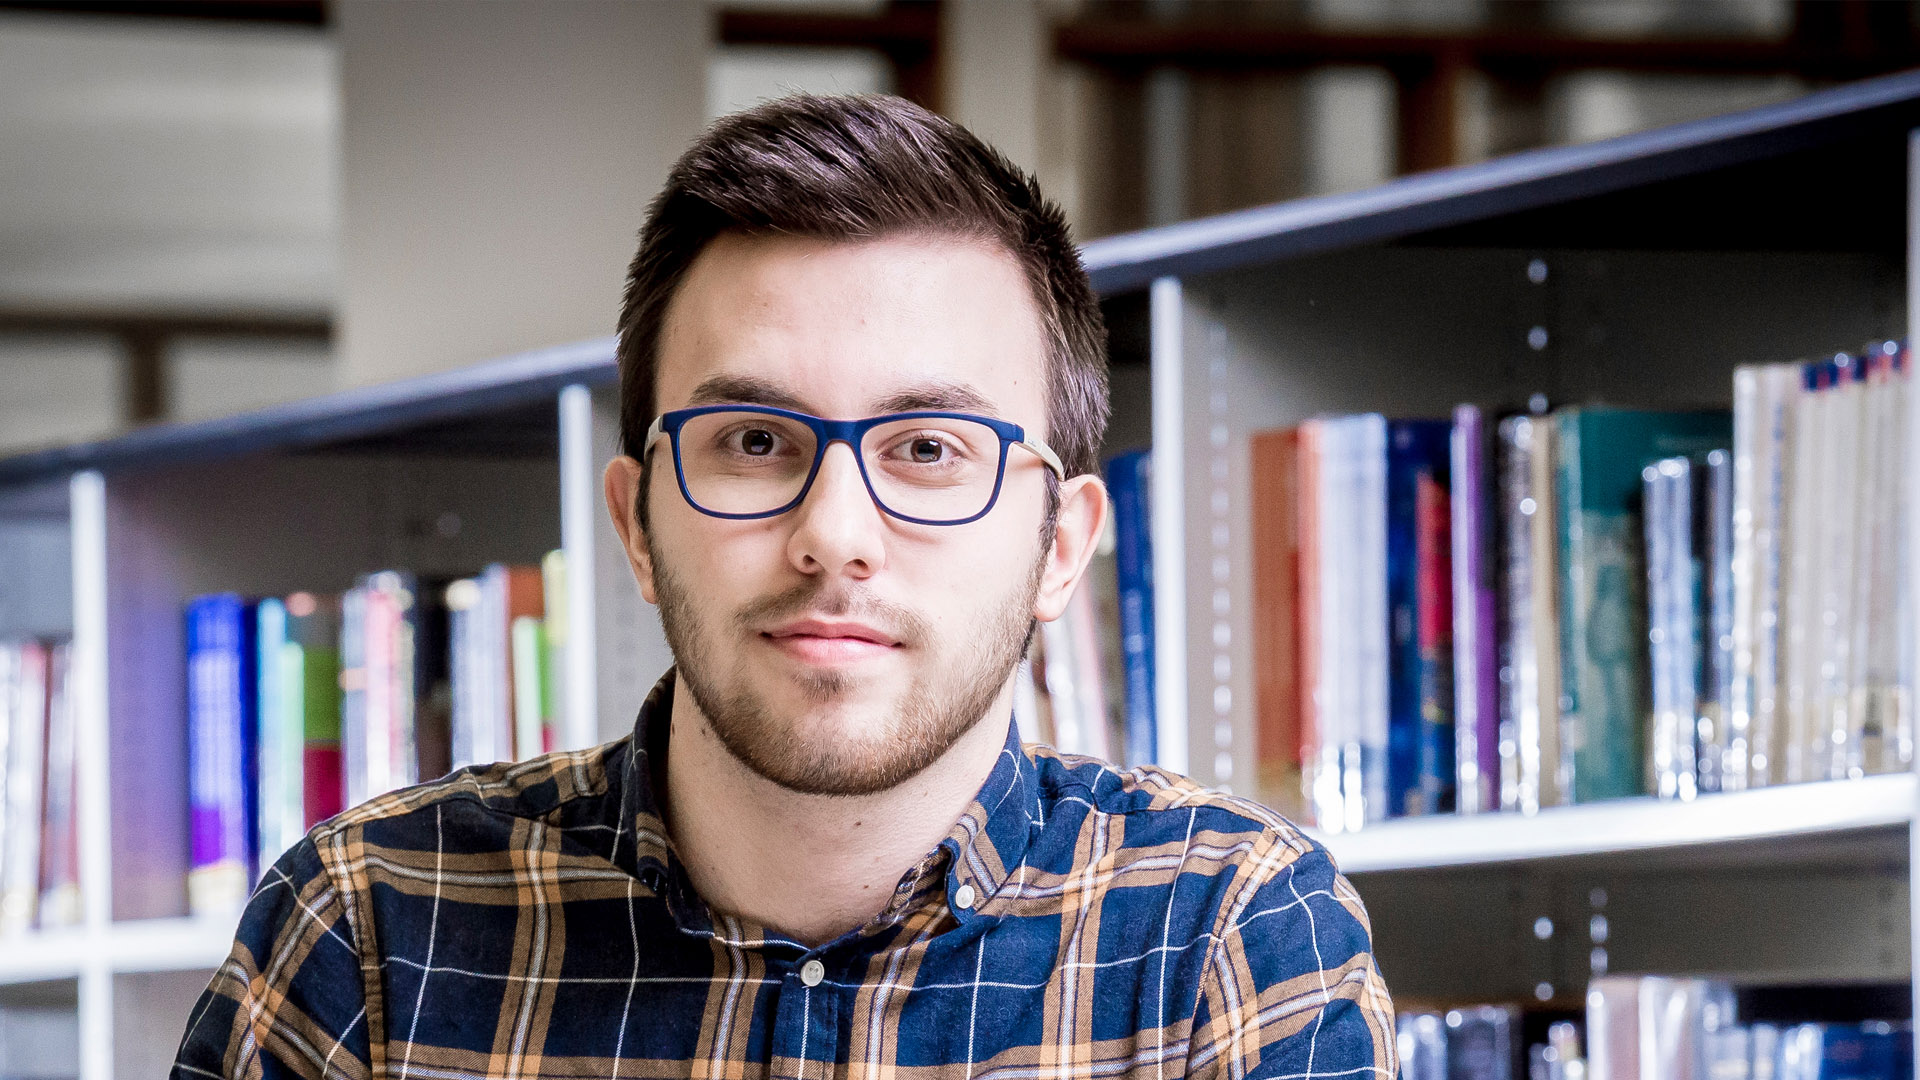 Male student sat in front of shelf of books